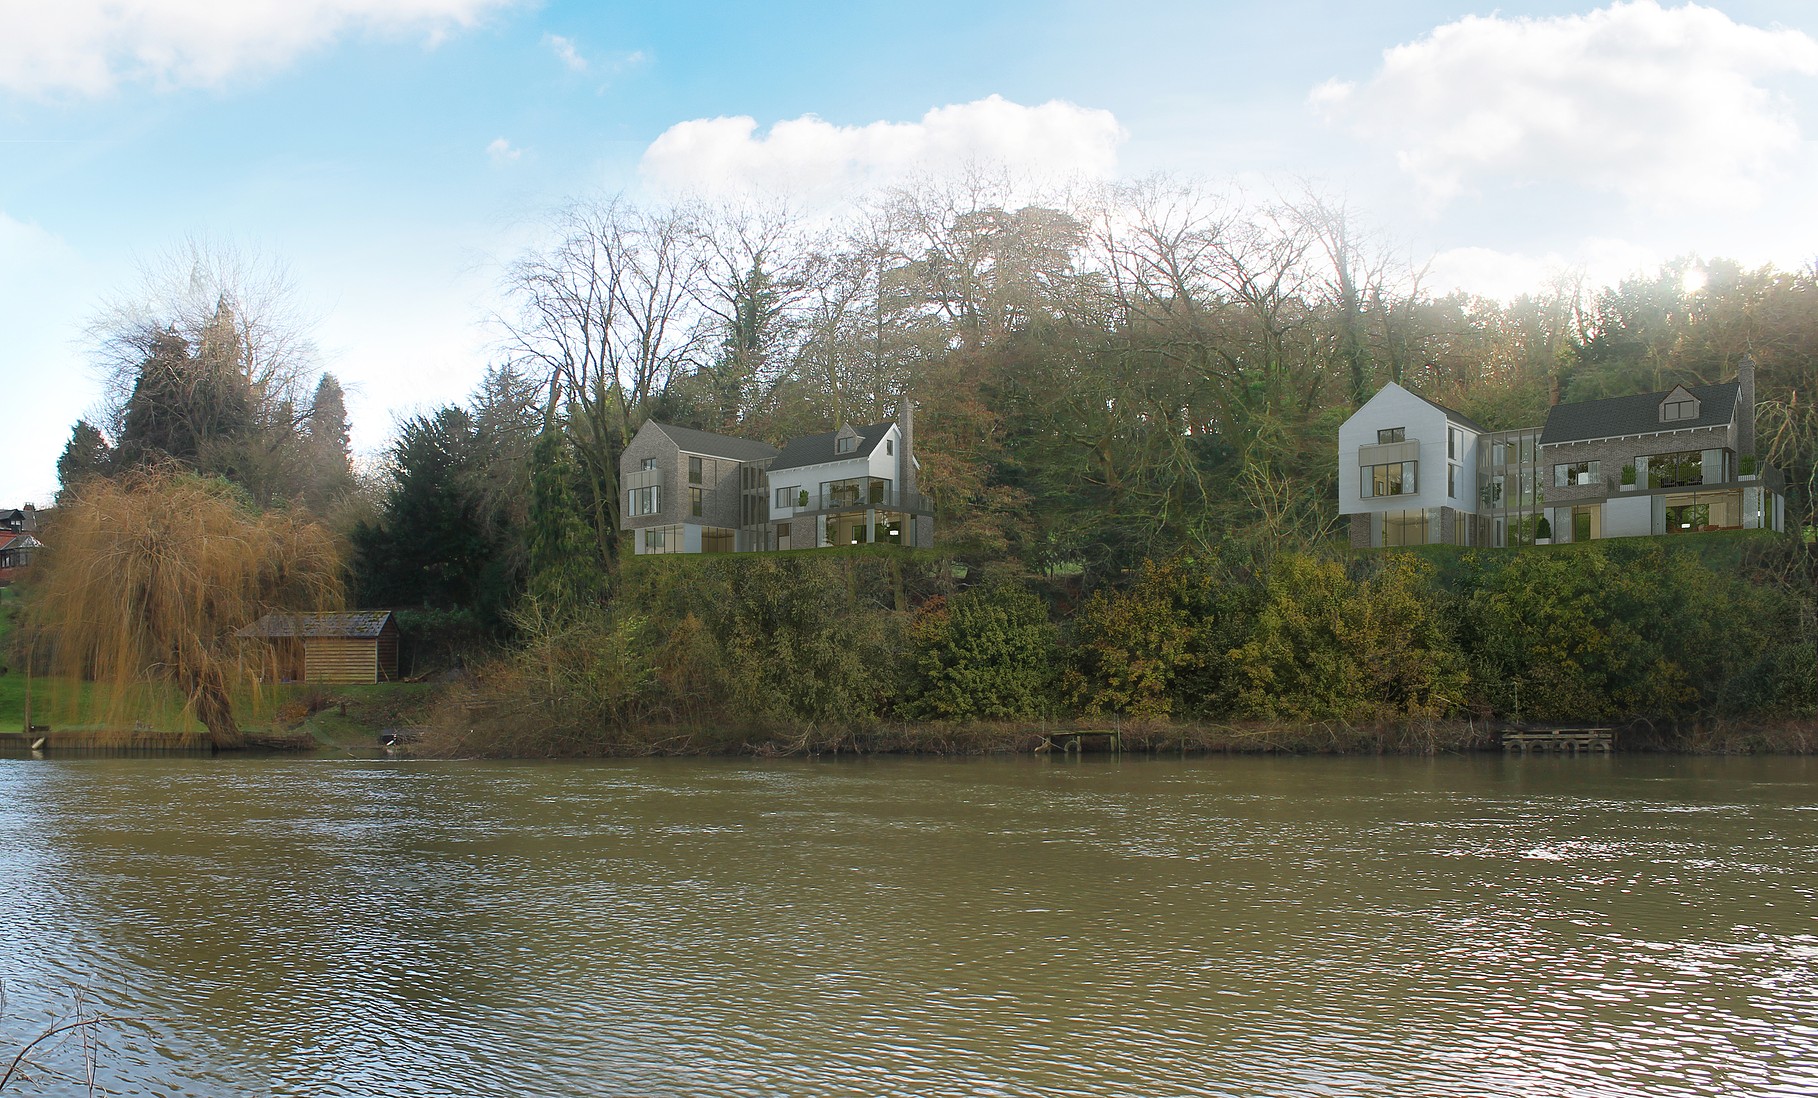 View from river of venders of new houses the Grotto